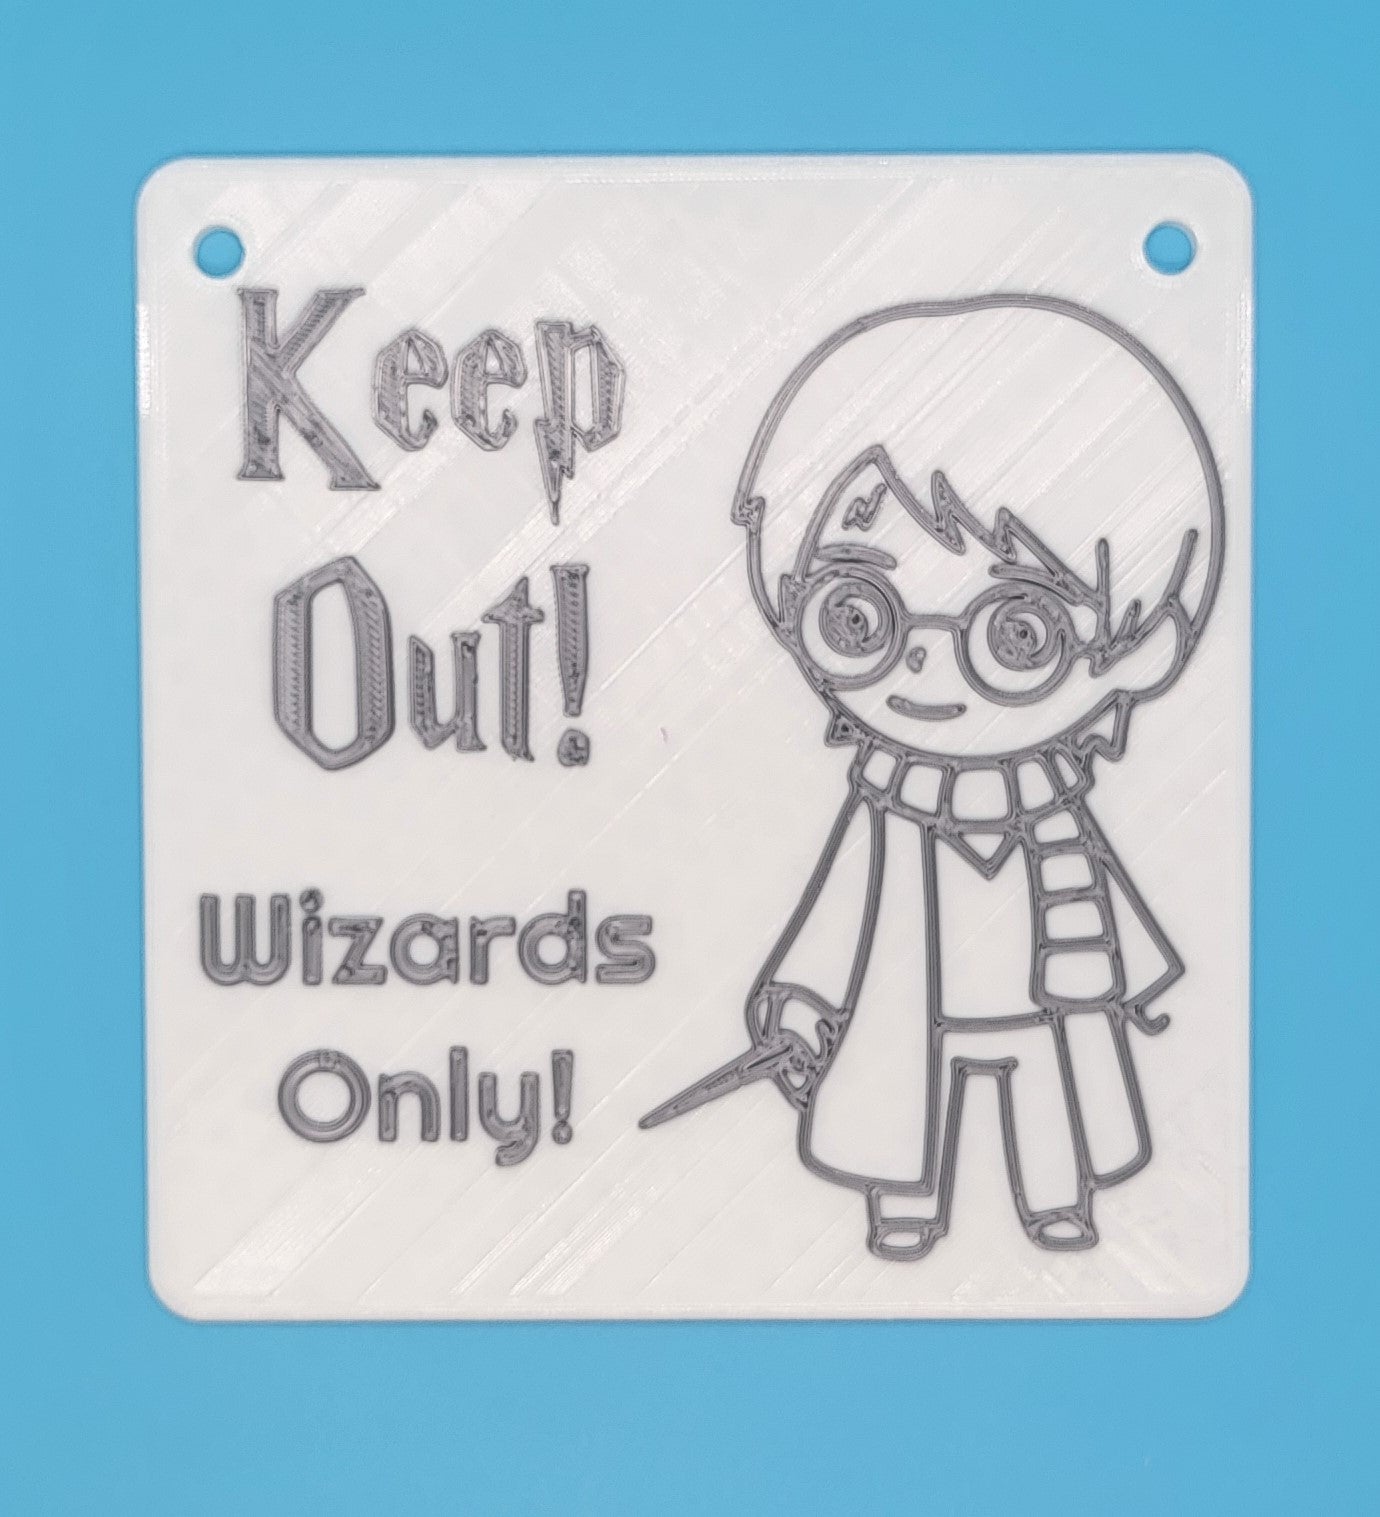 Keep Out! Wizards Only! - 3D printed sign